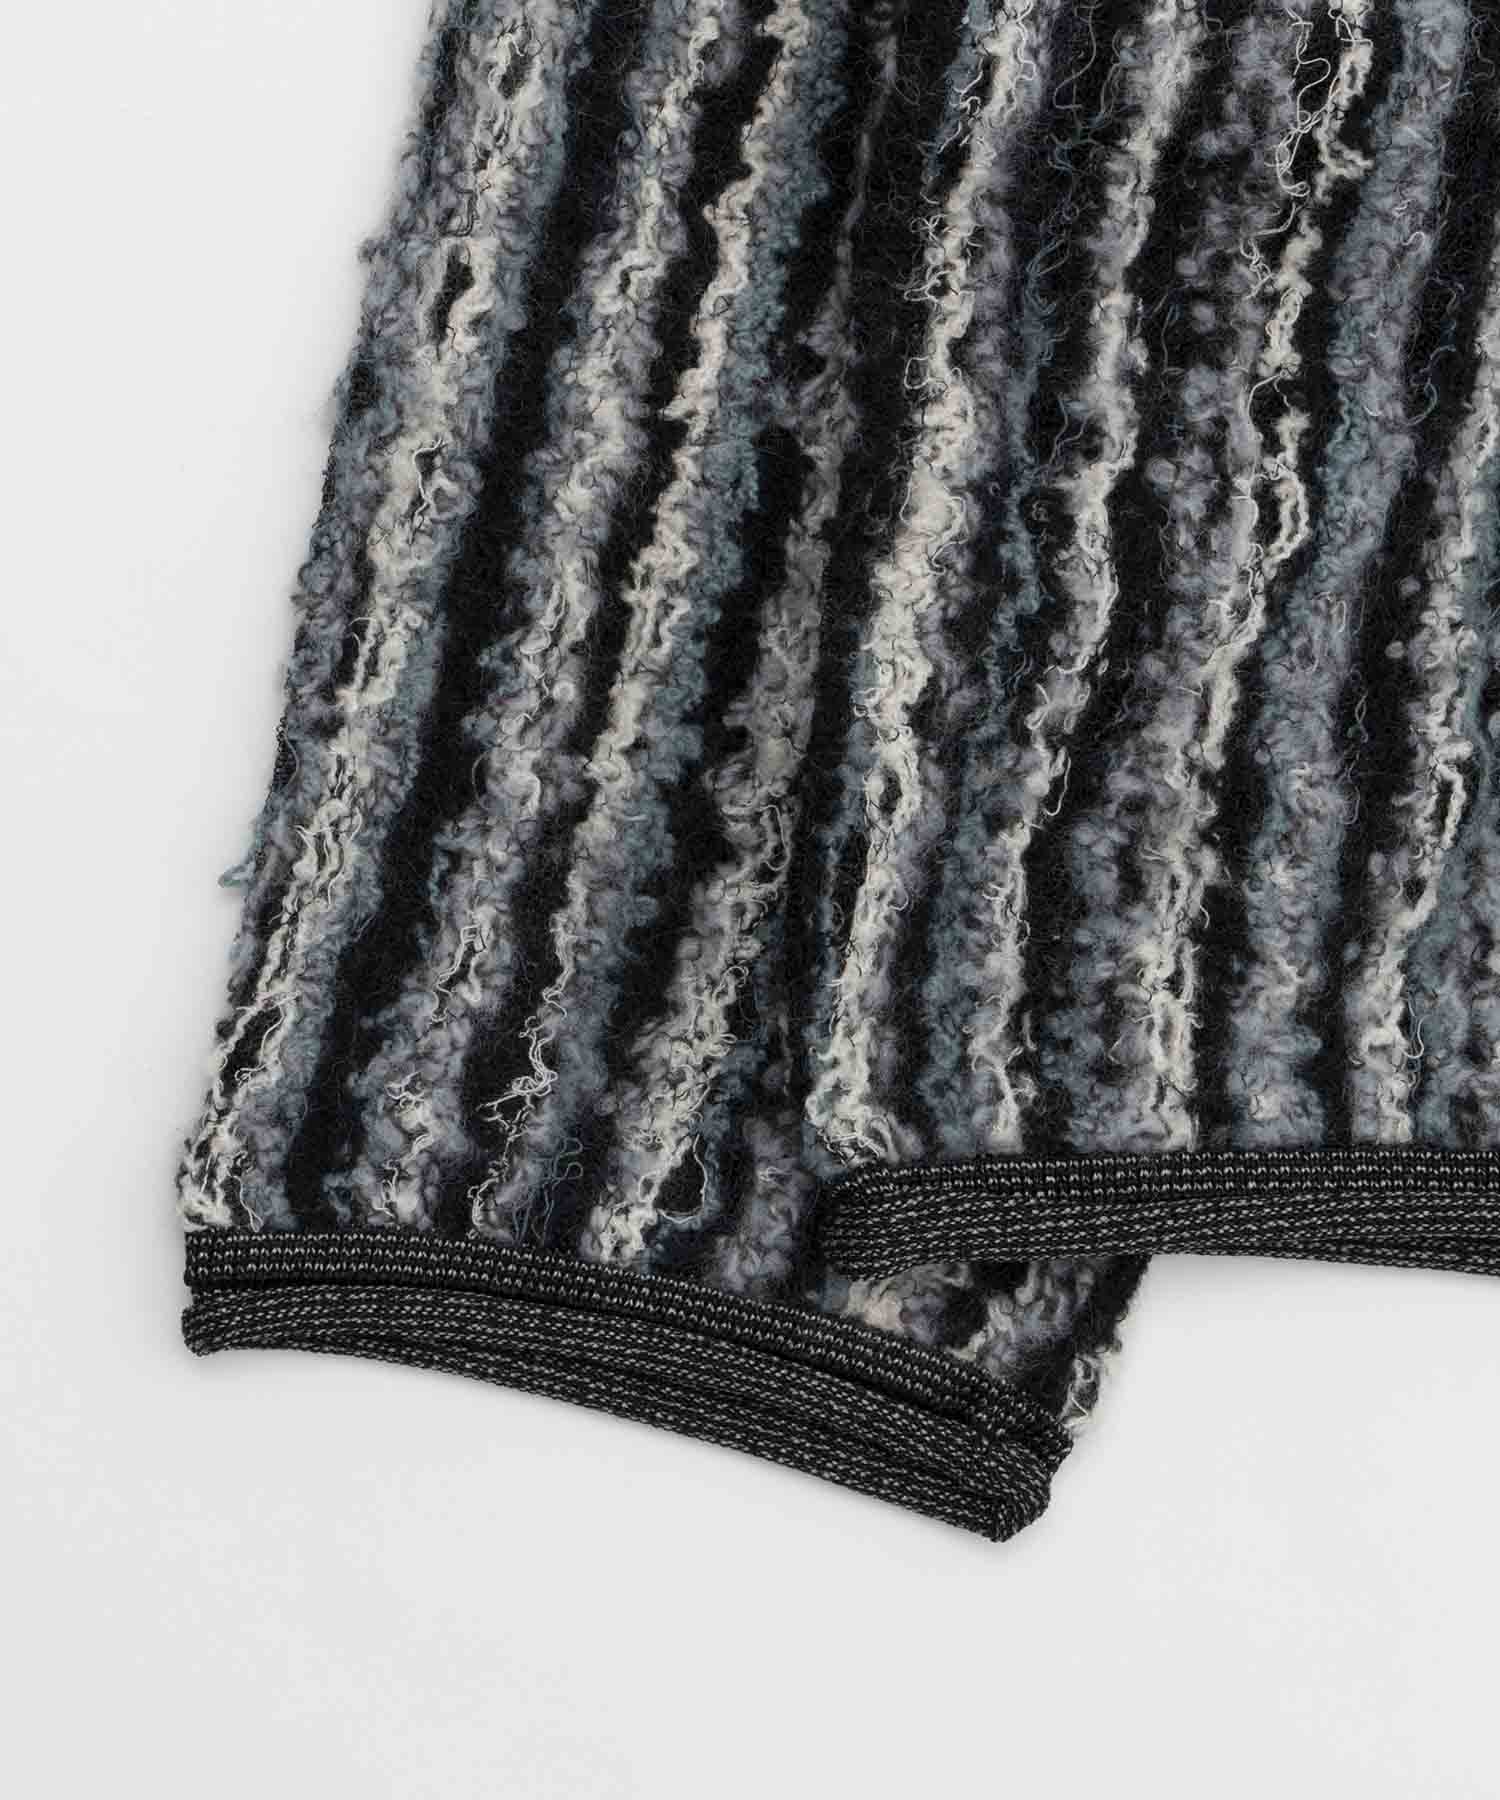 [SALE] IRREGULAR INLAY KNITTING PRIME-OVER CREW NECK KNIT PULLOVER